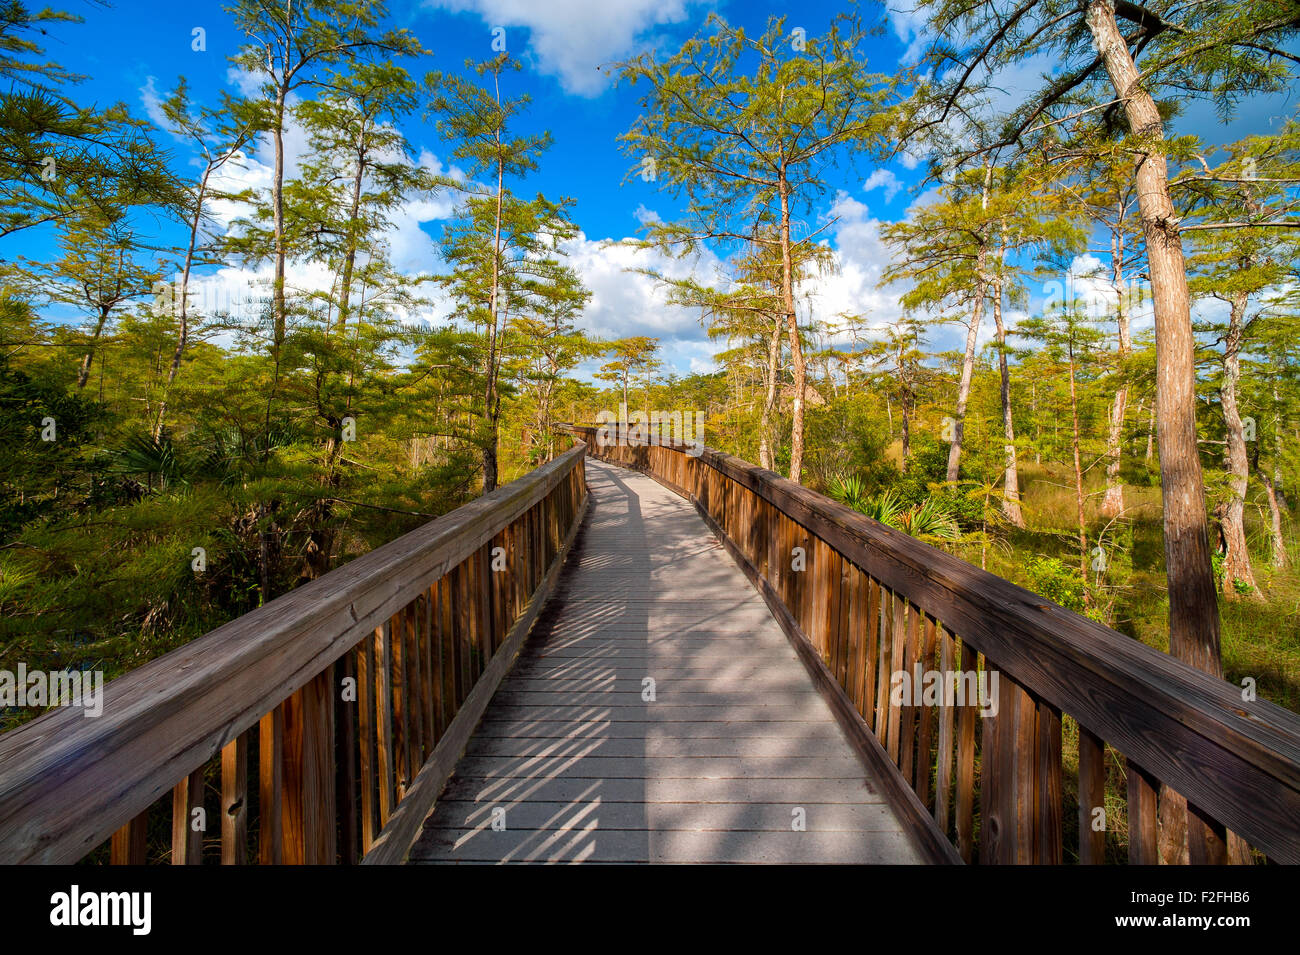 Wooden bridge in a forest, Kirby Storter Roadside Park, Ochopee, Collier County, Florida, USA Stock Photo